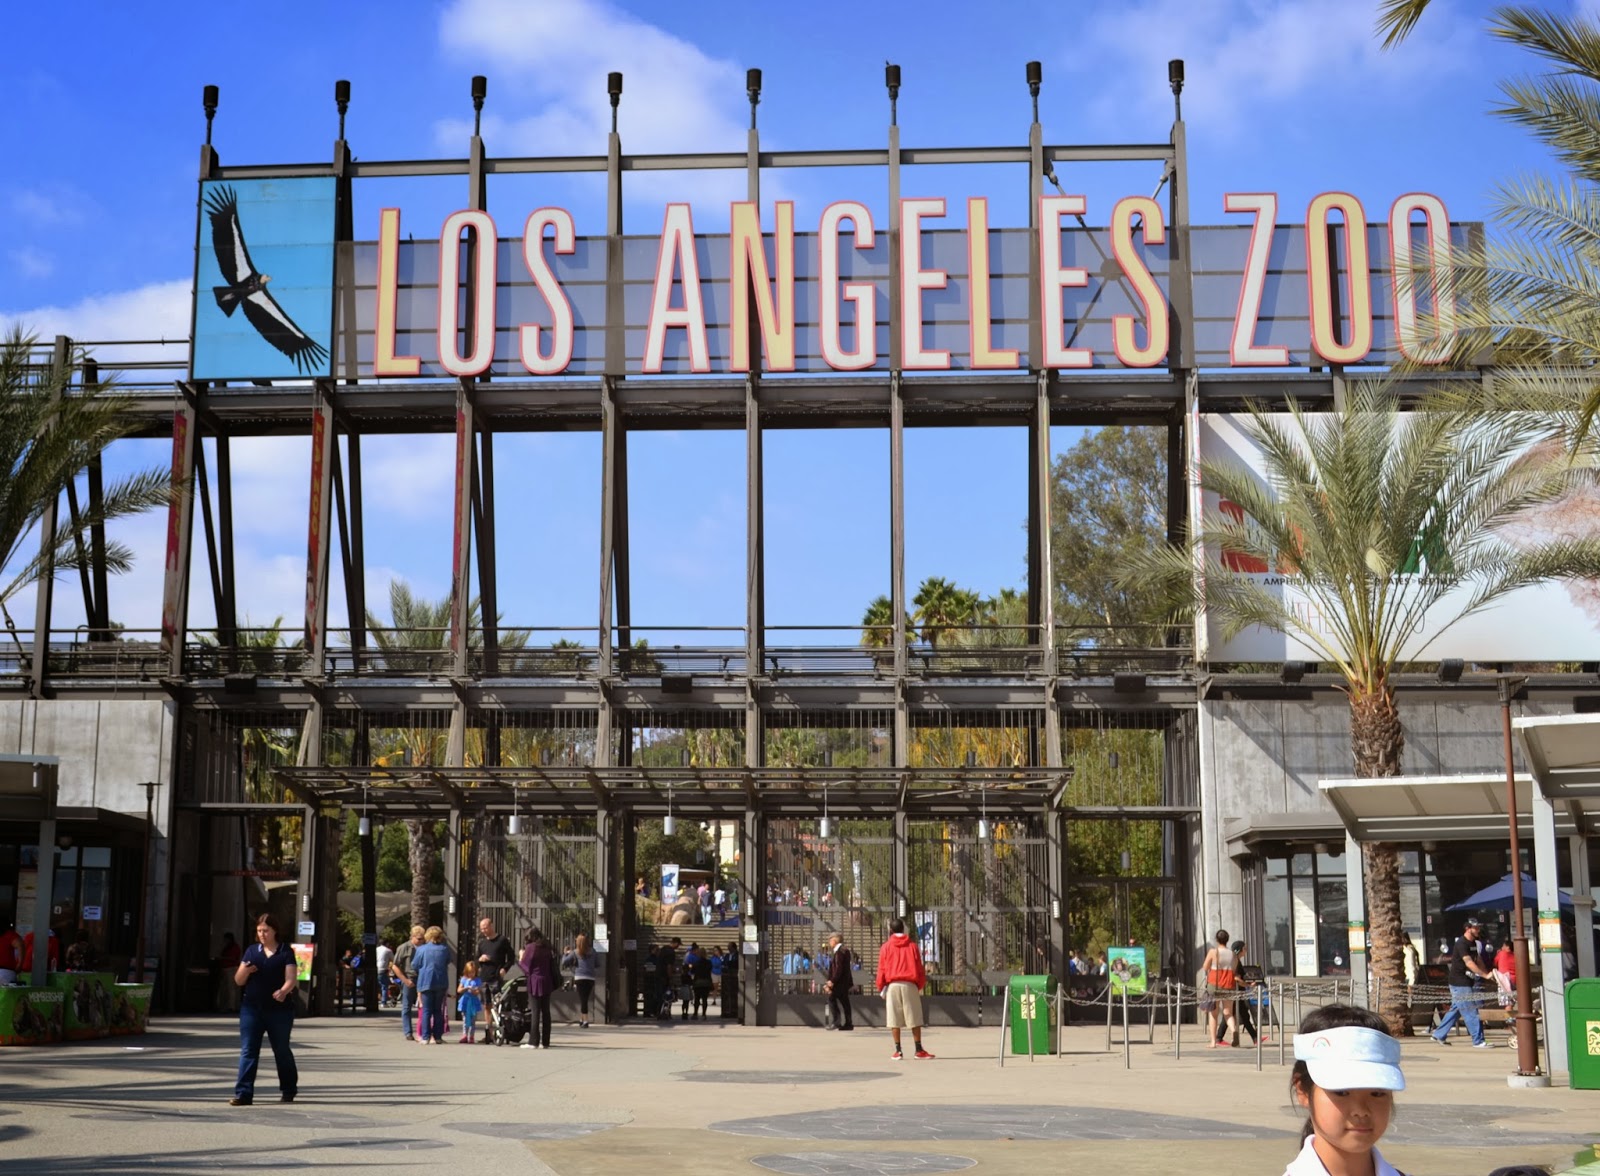 Do Tell, Anabel: The Los Angeles Zoo